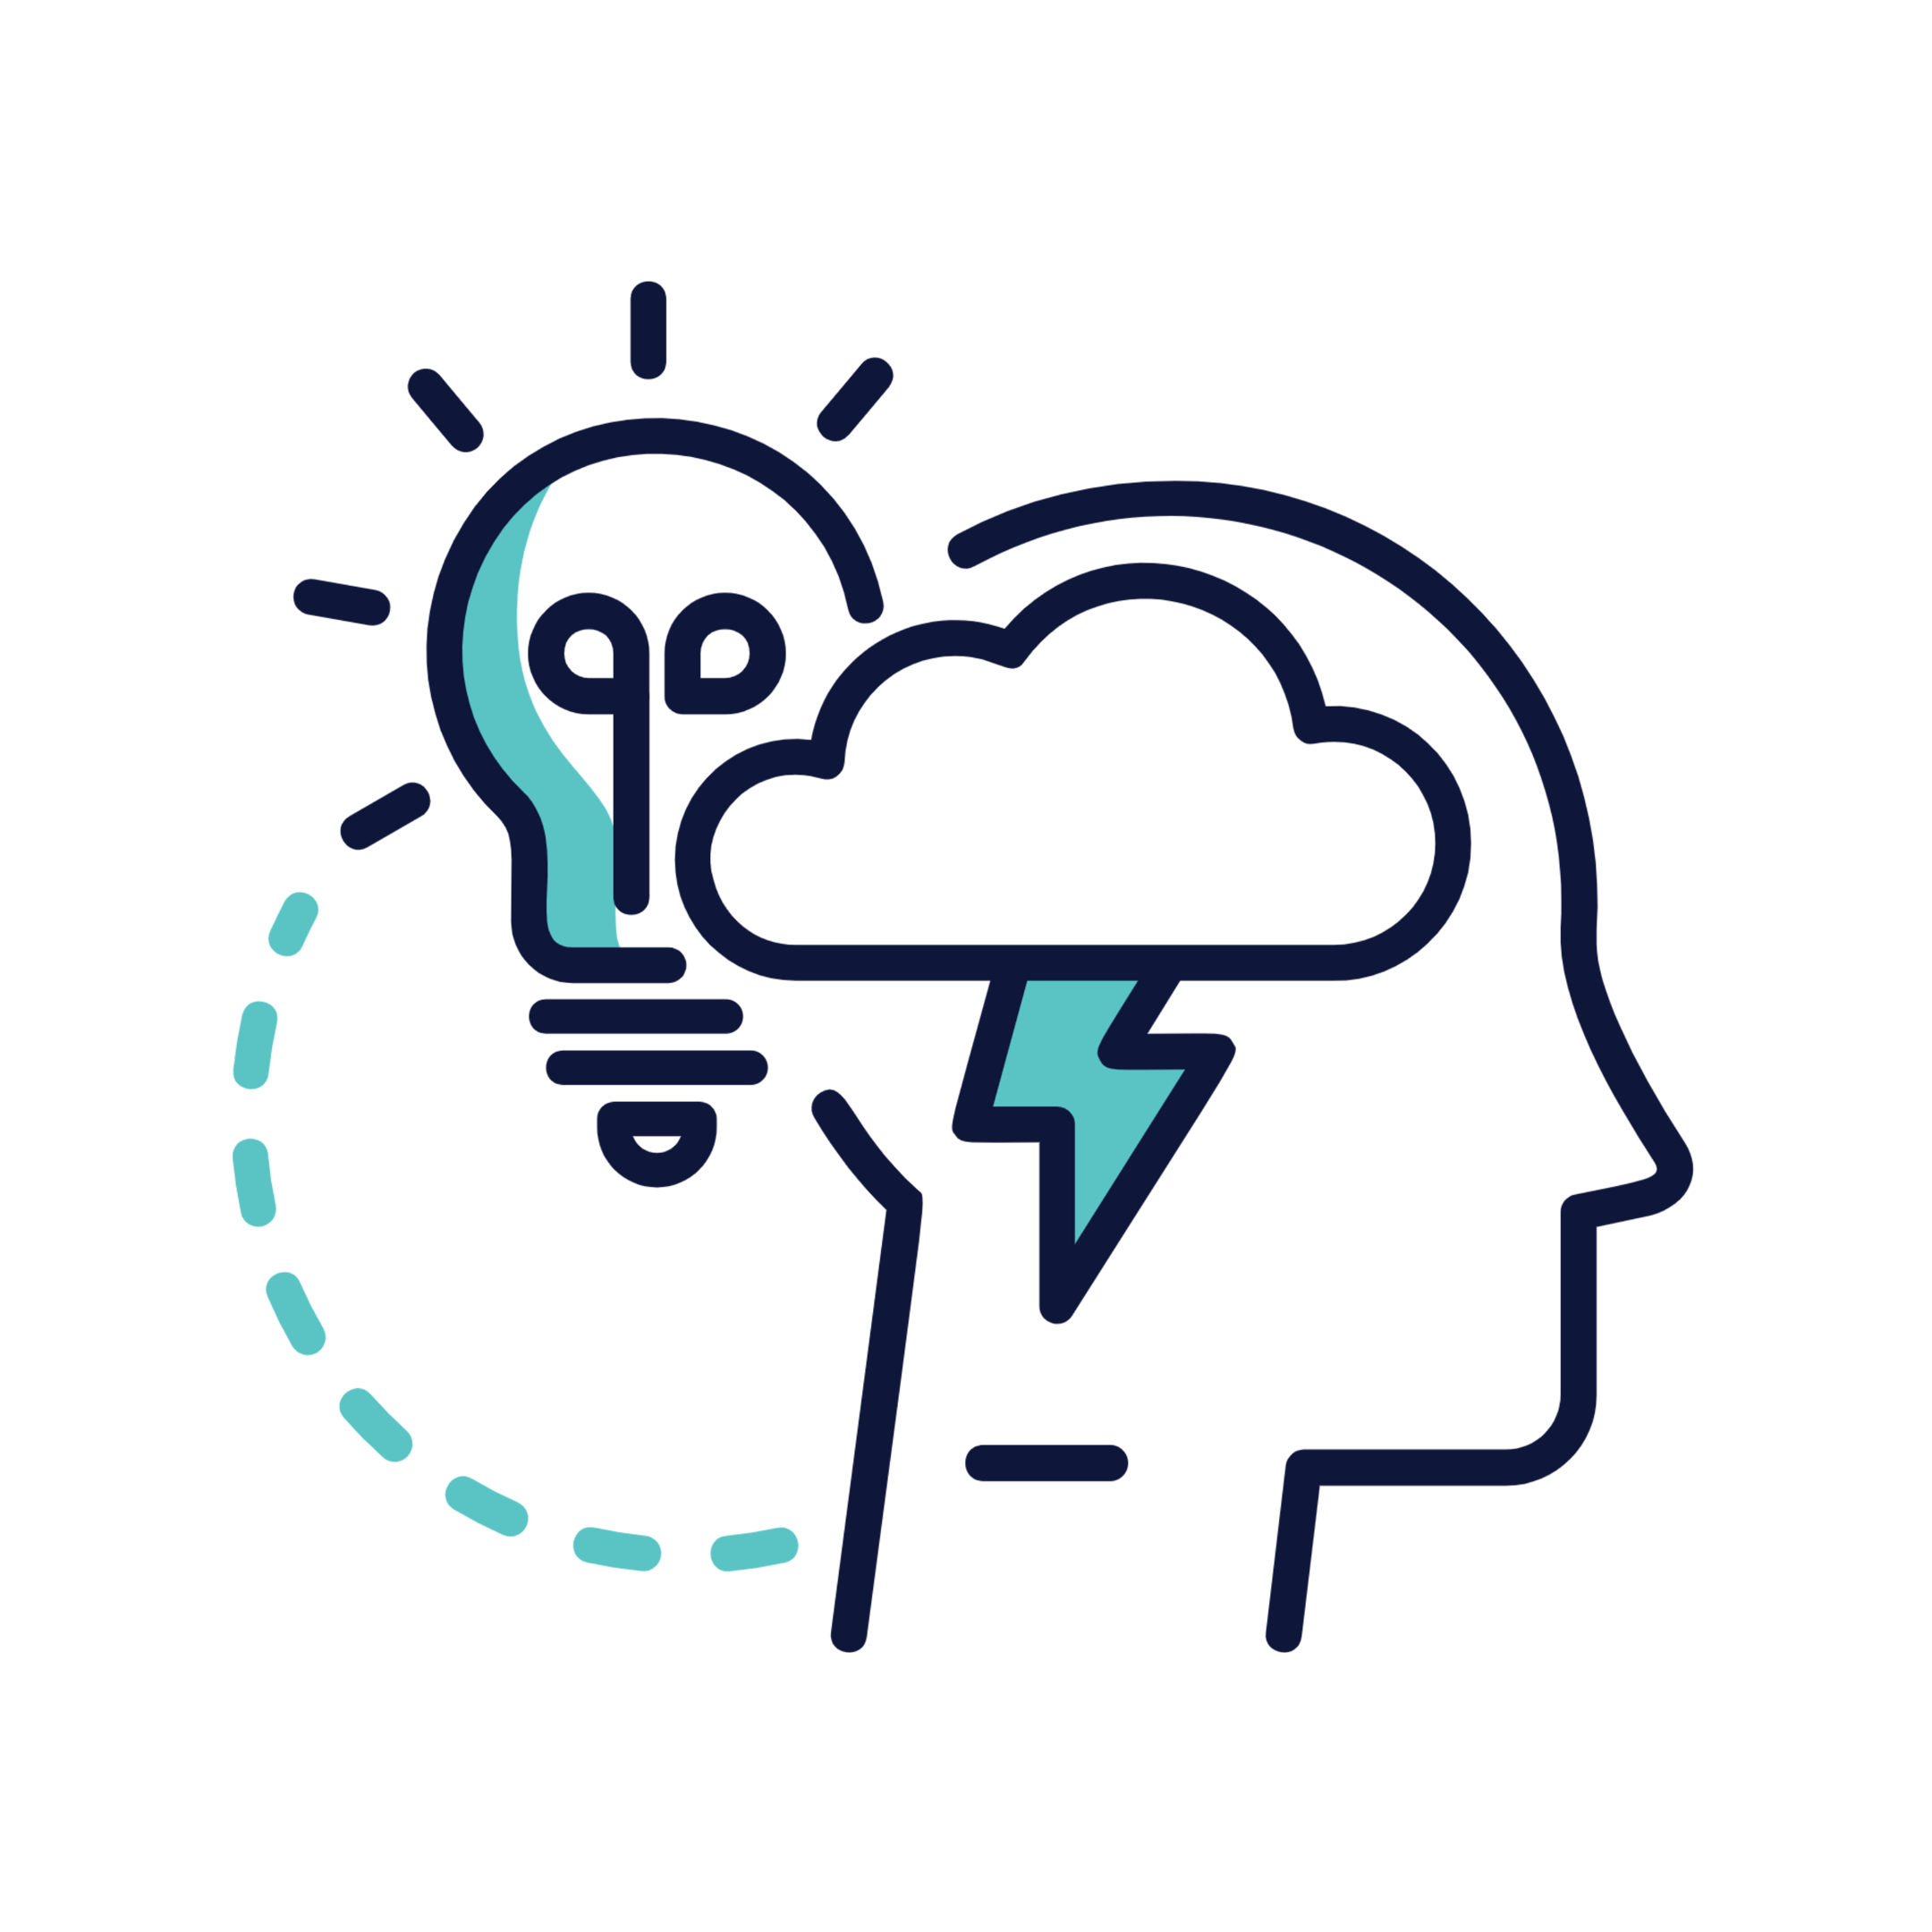 Illustration of a person's head. The place where the brain would be is occupied by a cloud with lightning emerging from it. There is a light bulb next to the cloud.